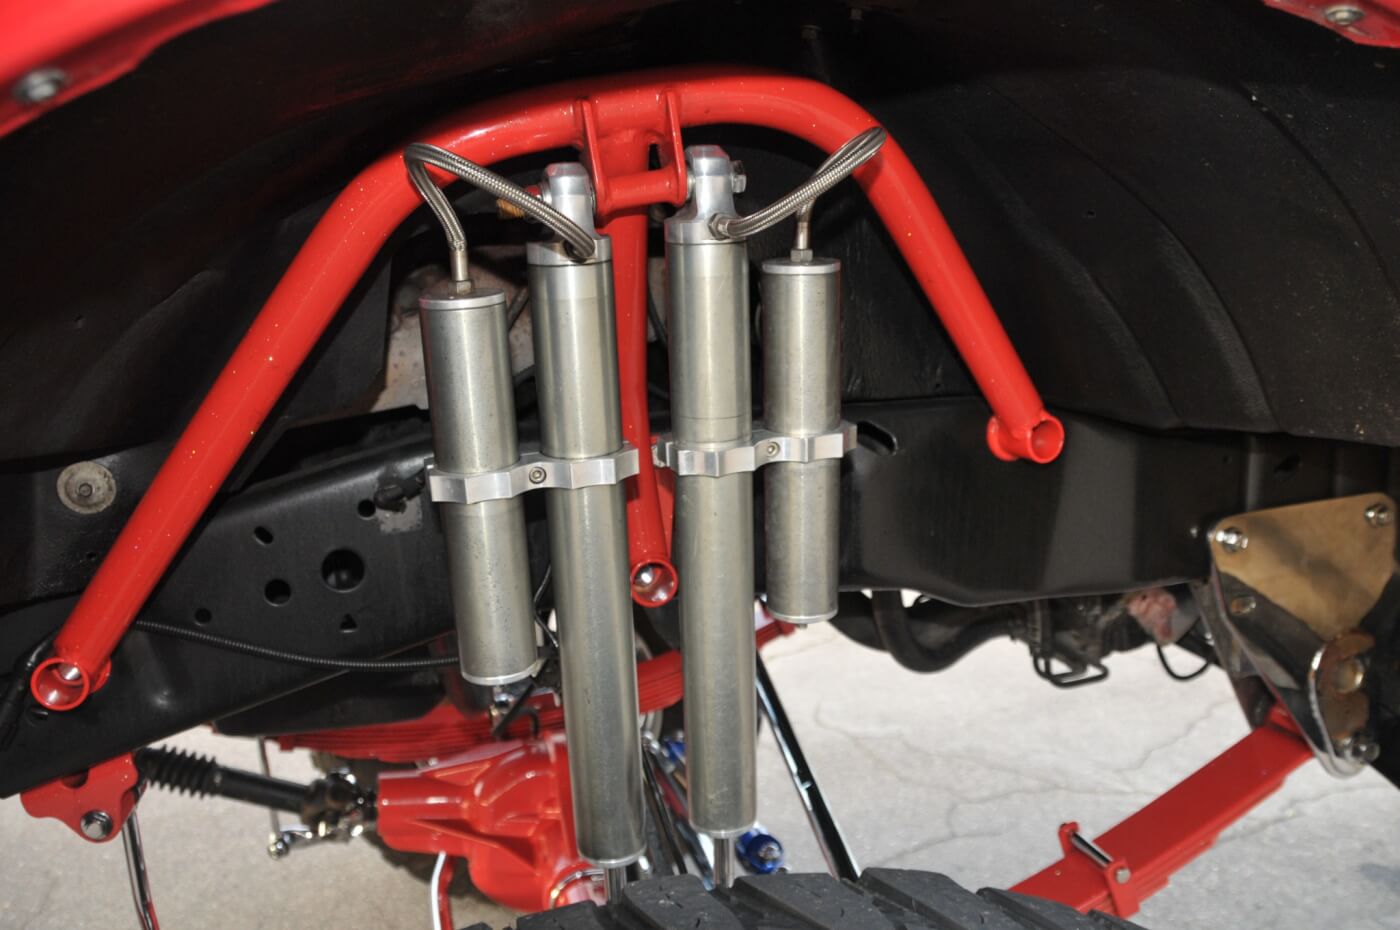 Fox dual-reservoir shocks give a plush ride for the F-250.